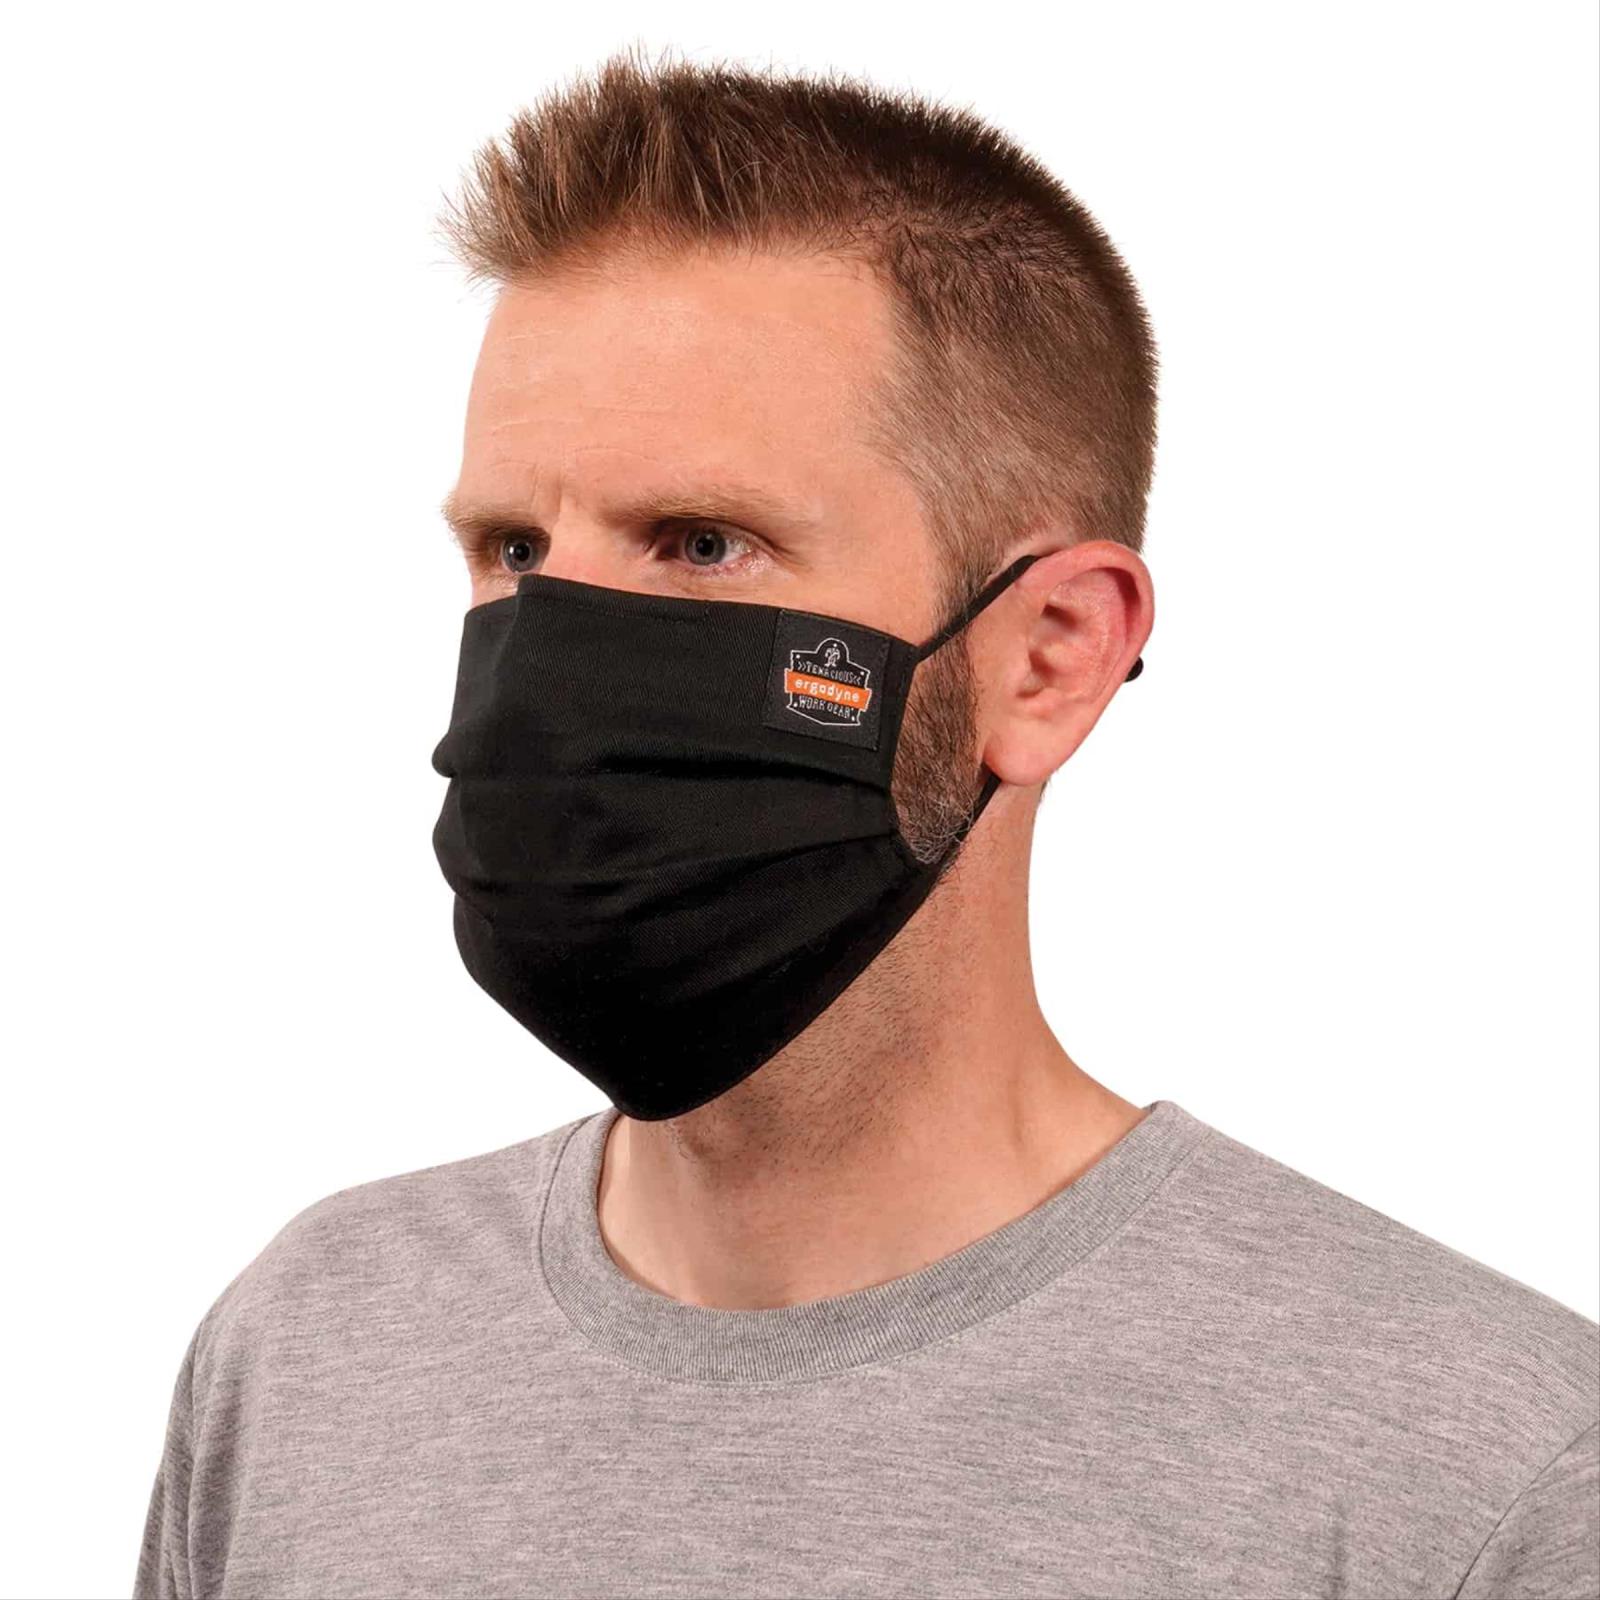 Skullerz 8801 Pleated Face Cover Mask, Reusable